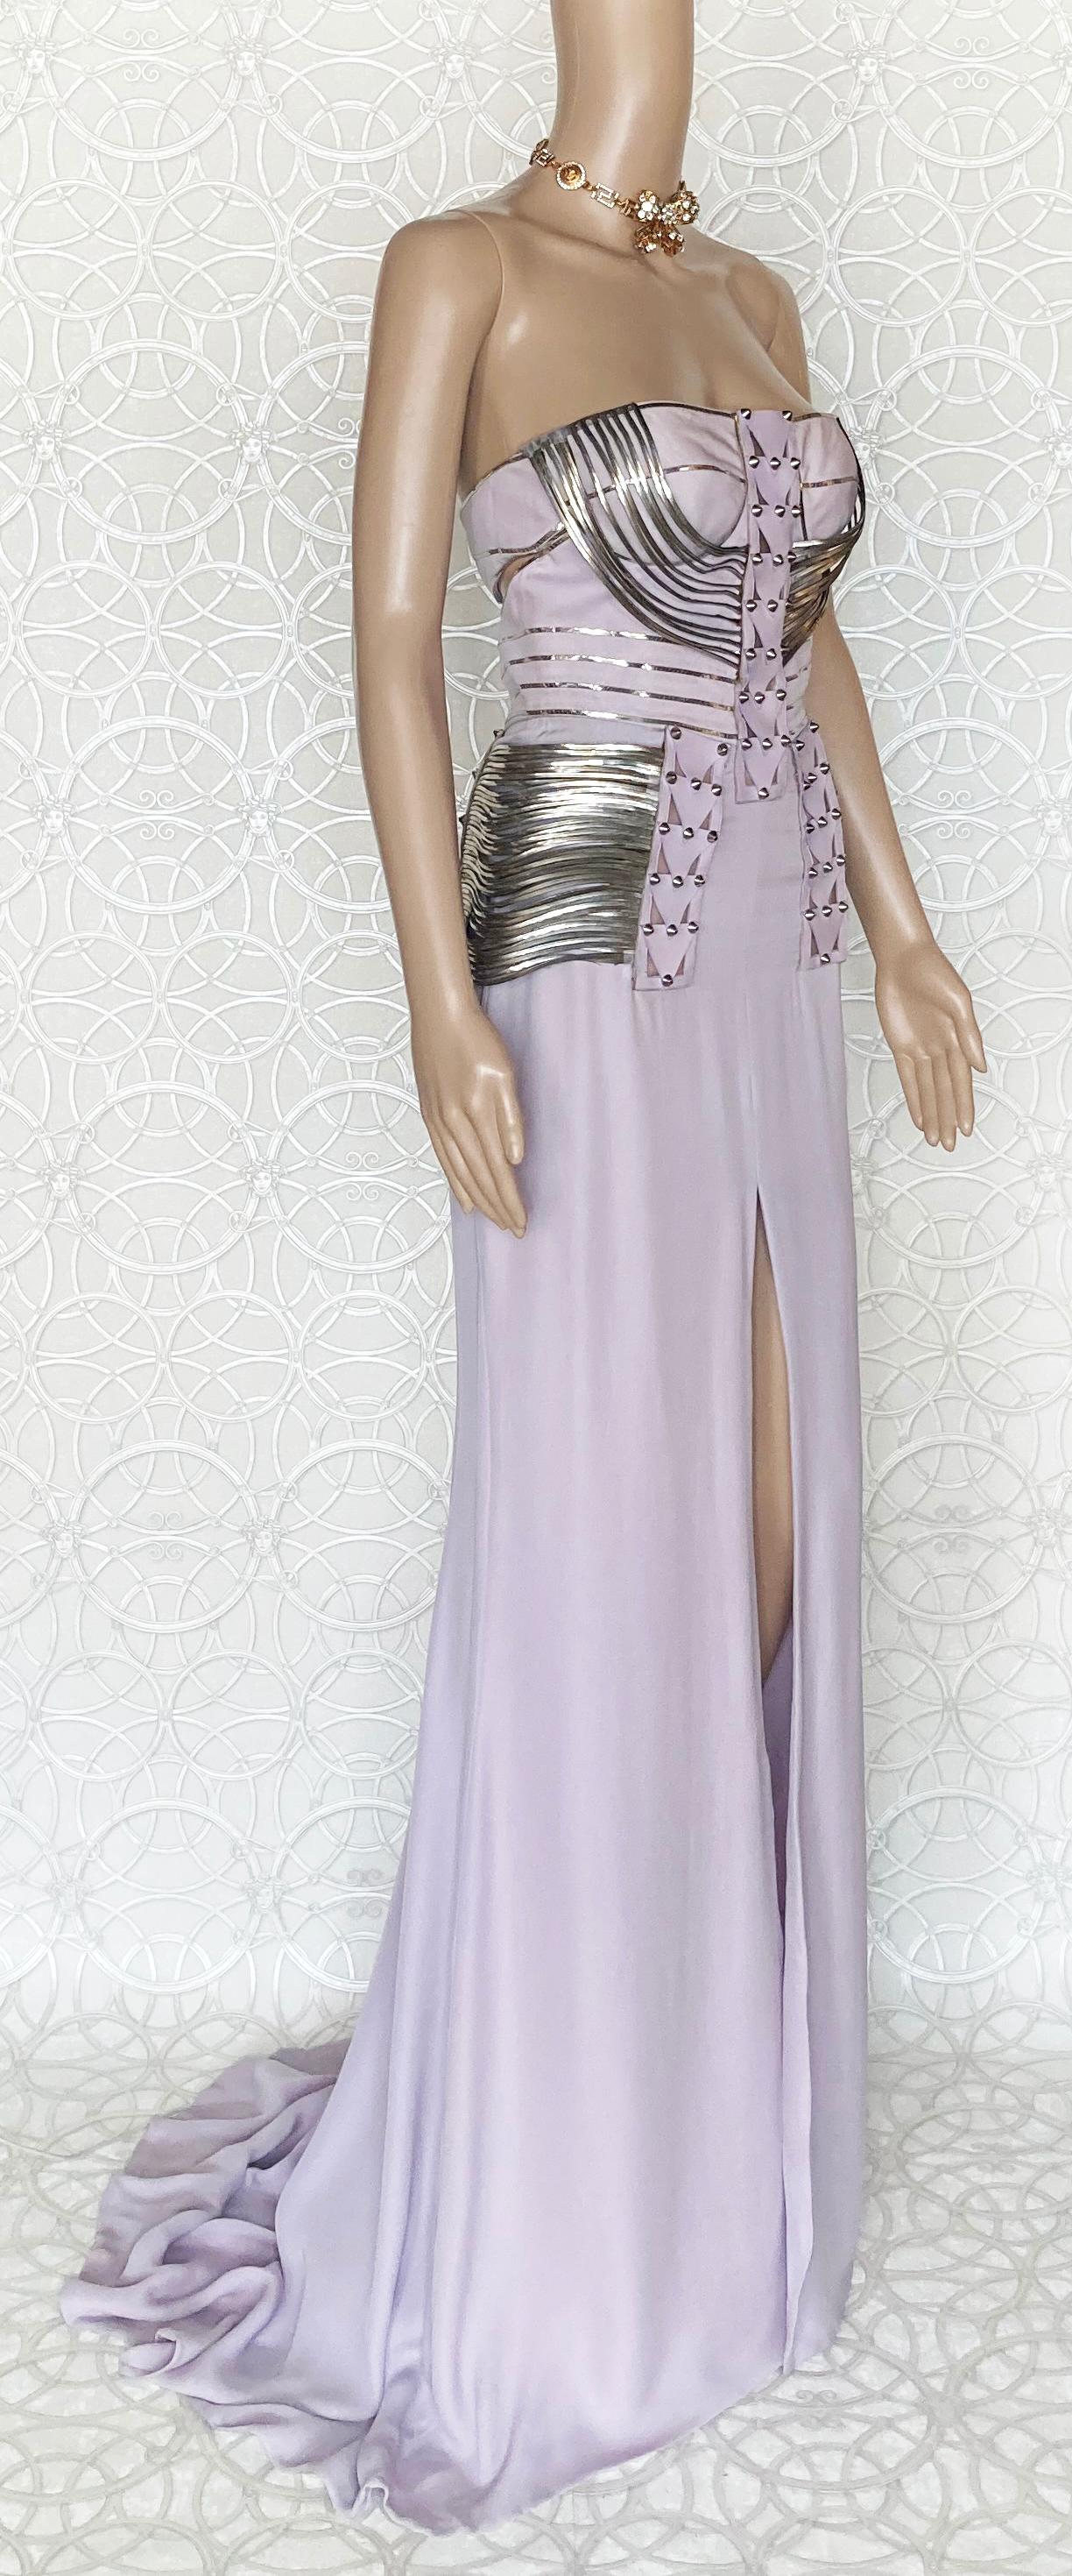 S/S 2010 L# 47 VERSACE EMBELLISHED LONG DRESS GOWN 40 - 4 as seen on DONATELLA For Sale 5